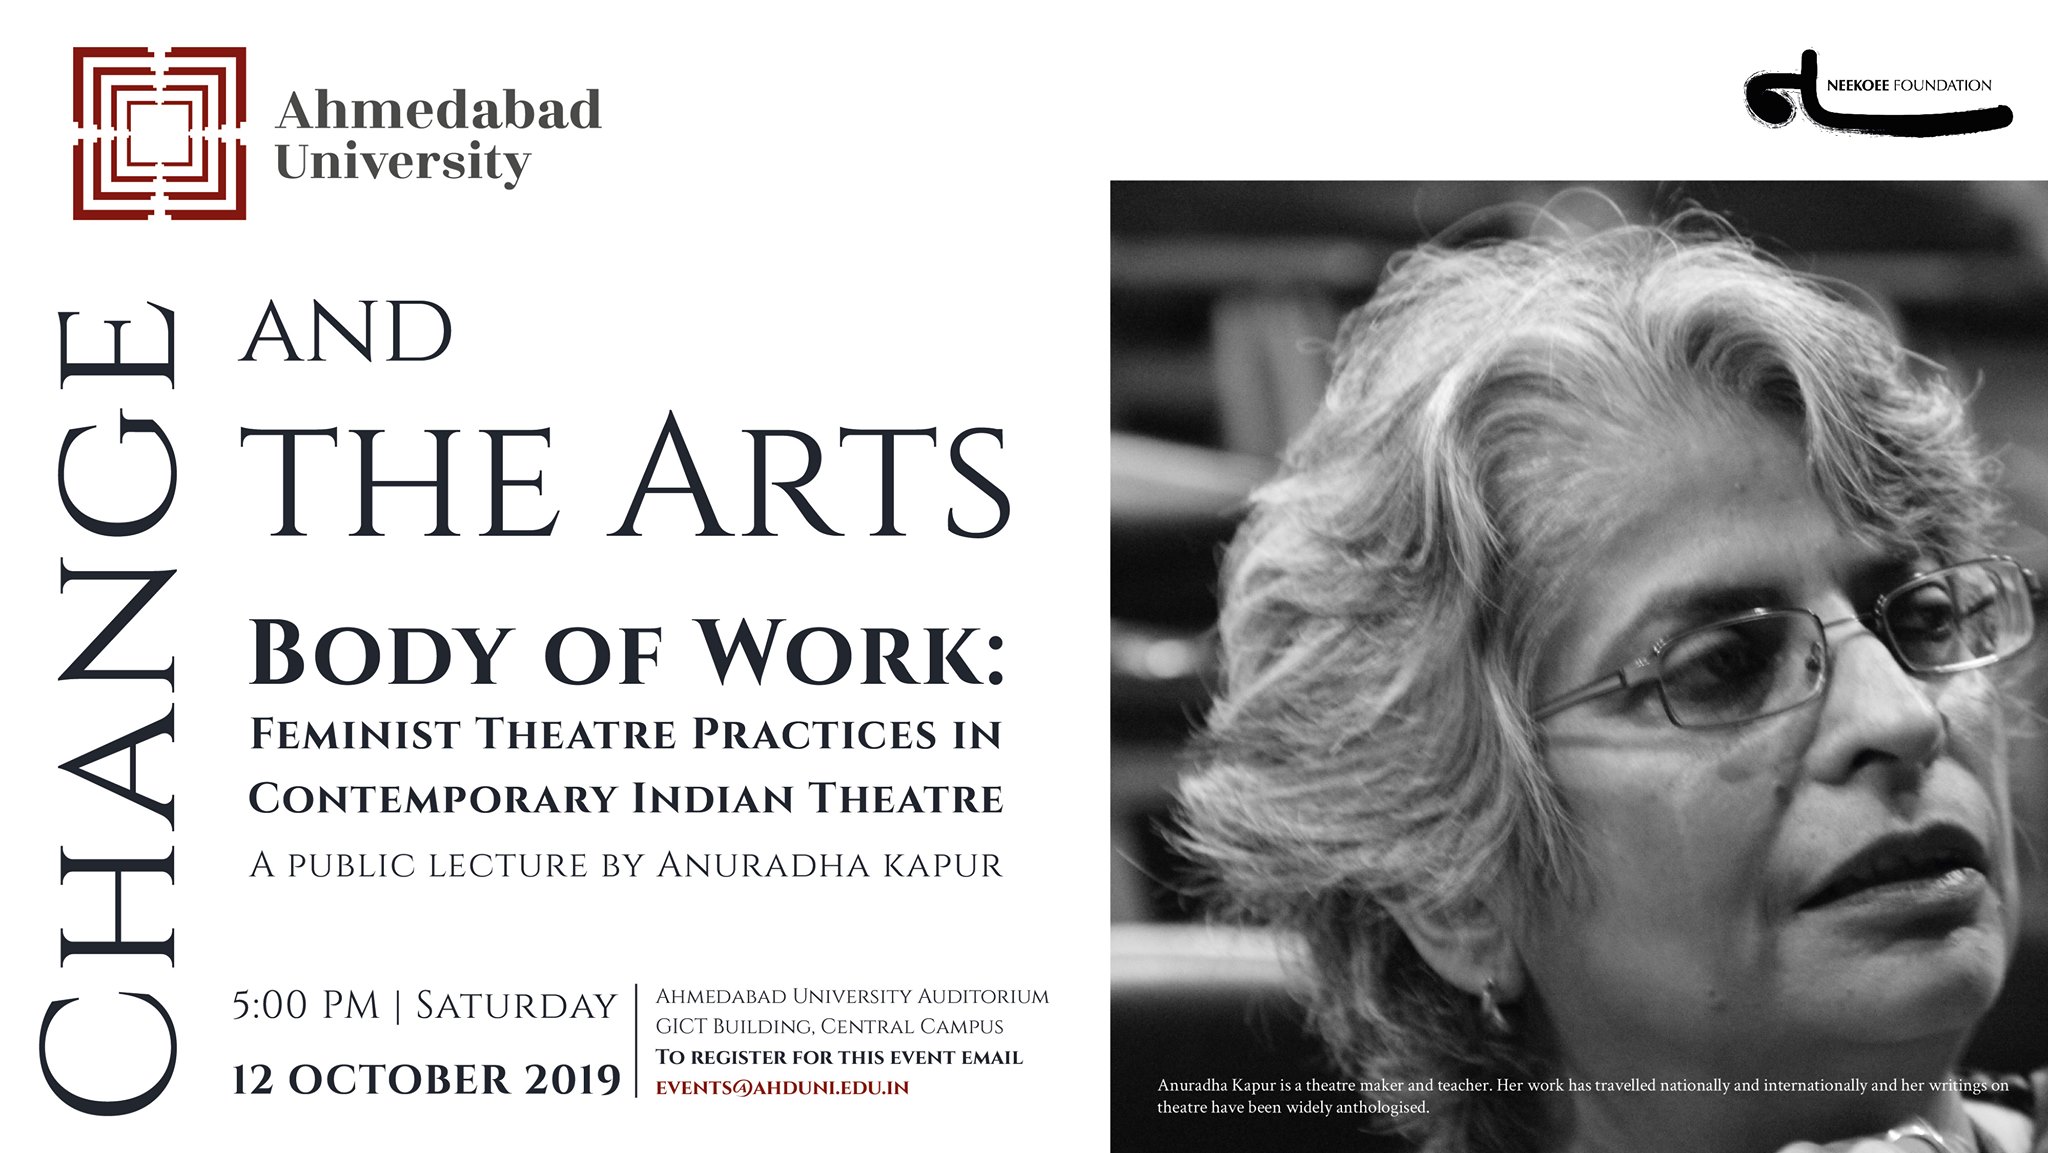 https://creativeyatra.com/wp-content/uploads/2019/10/Change-And-The-Arts-Public-Lecture-by-Anuradha-Kapur.jpg